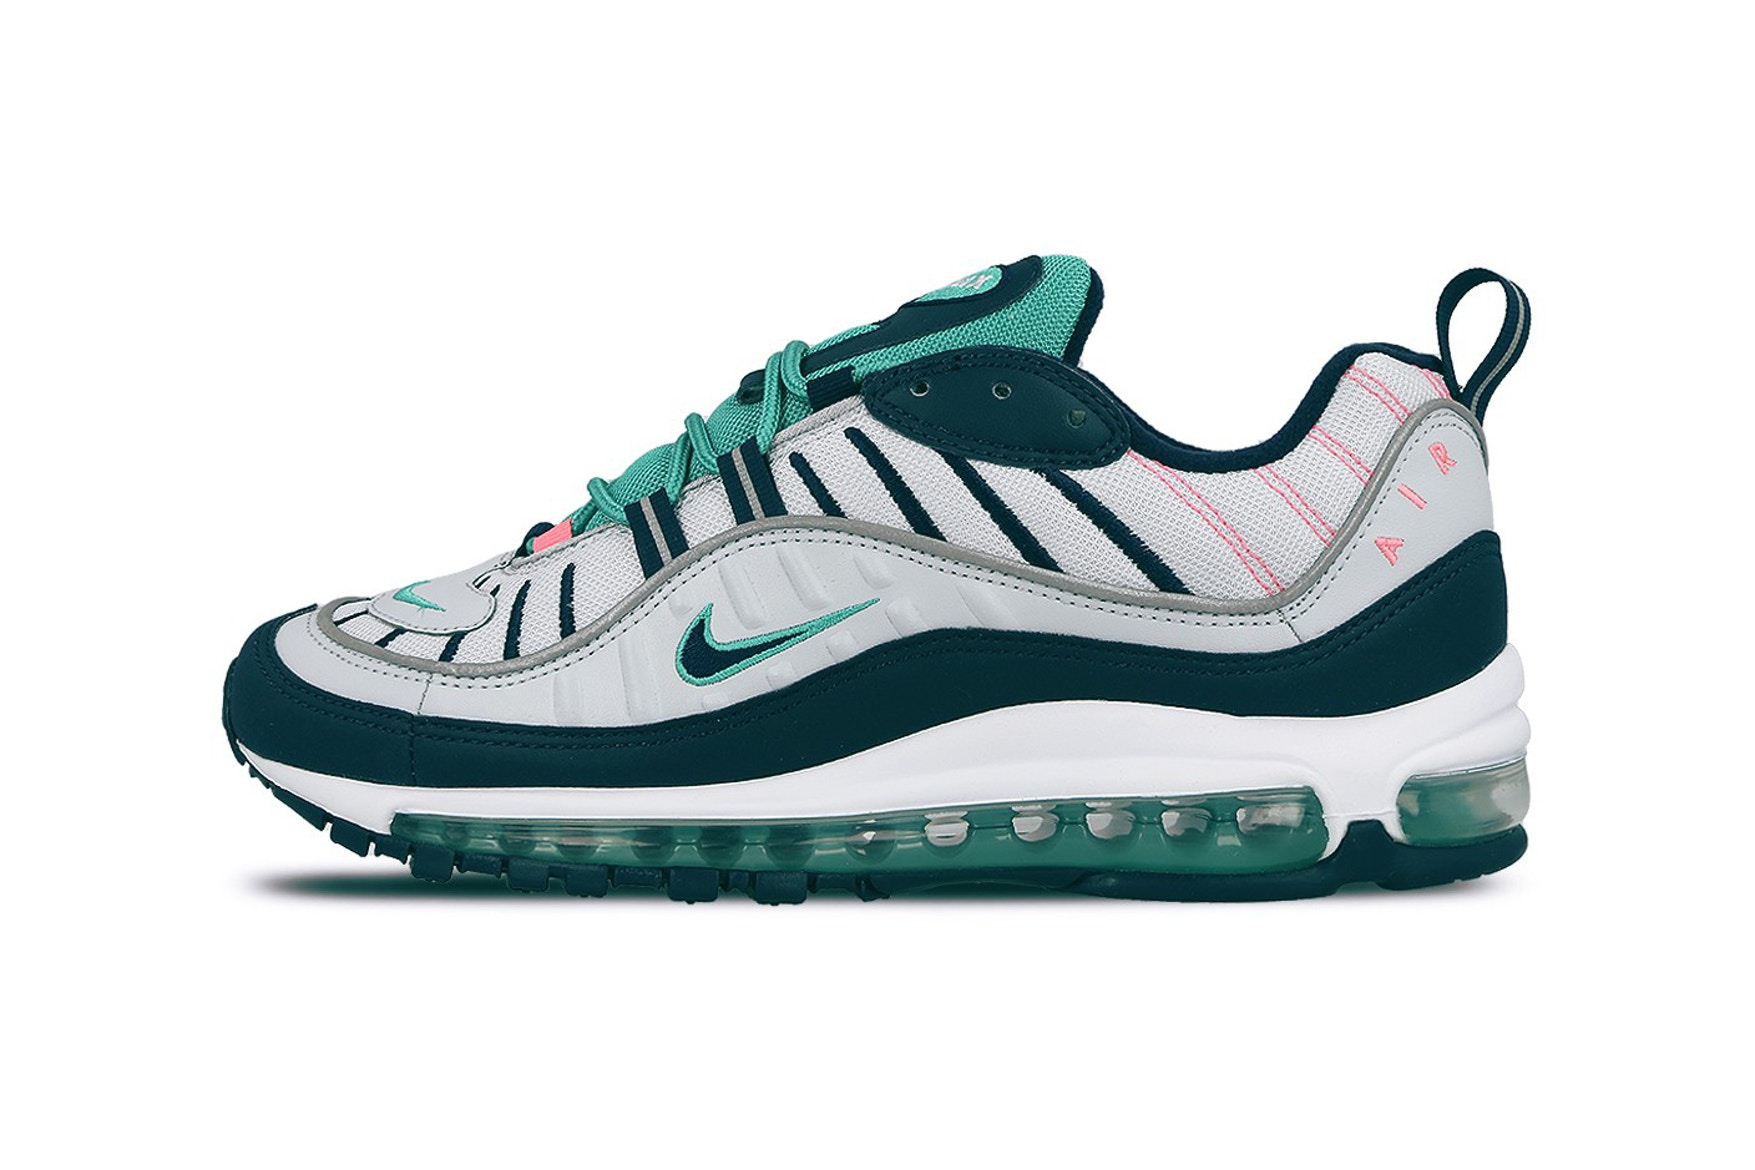 nike-air-max-98-racer-blue-kinetic-green-team-red-se-2